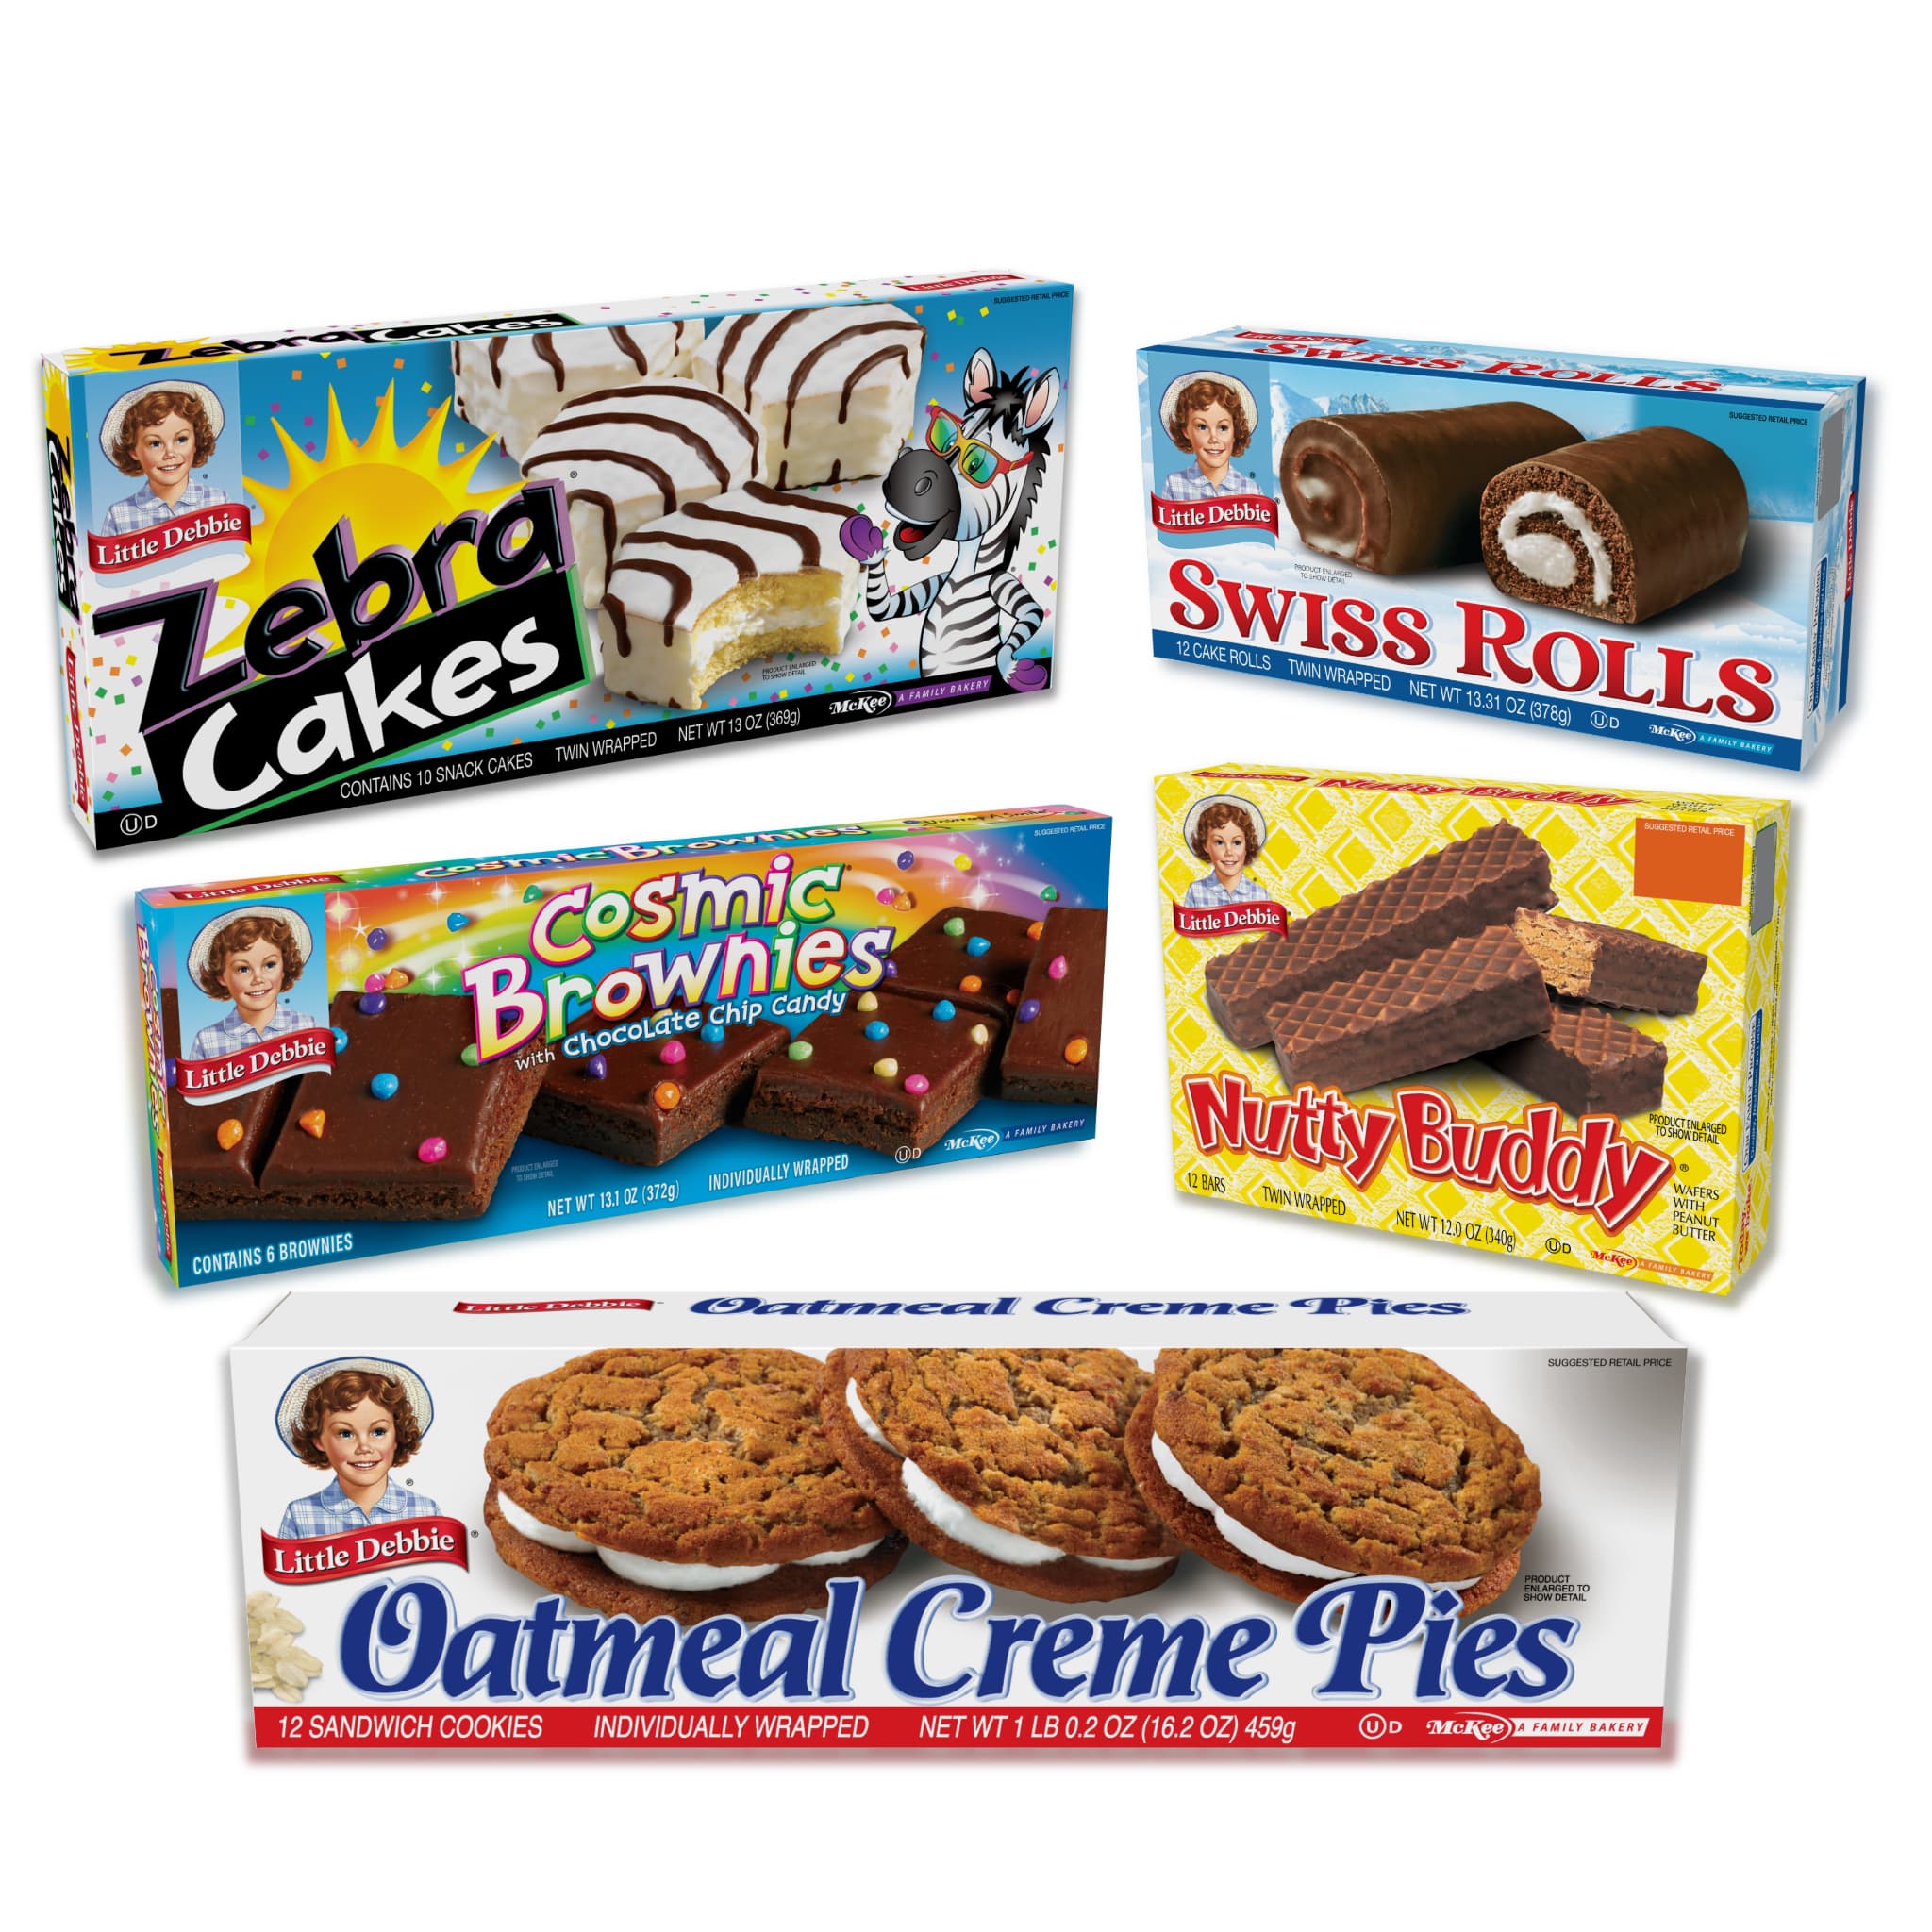 A collection of Little Debbie snacks displayed together, including one carton each of Zebra Cakes, Swiss Rolls, Cosmic Brownies, Nutty Buddy Wafer Bars, and Oatmeal Creme Pies. Each carton features colorful packaging with images of the respective treats.